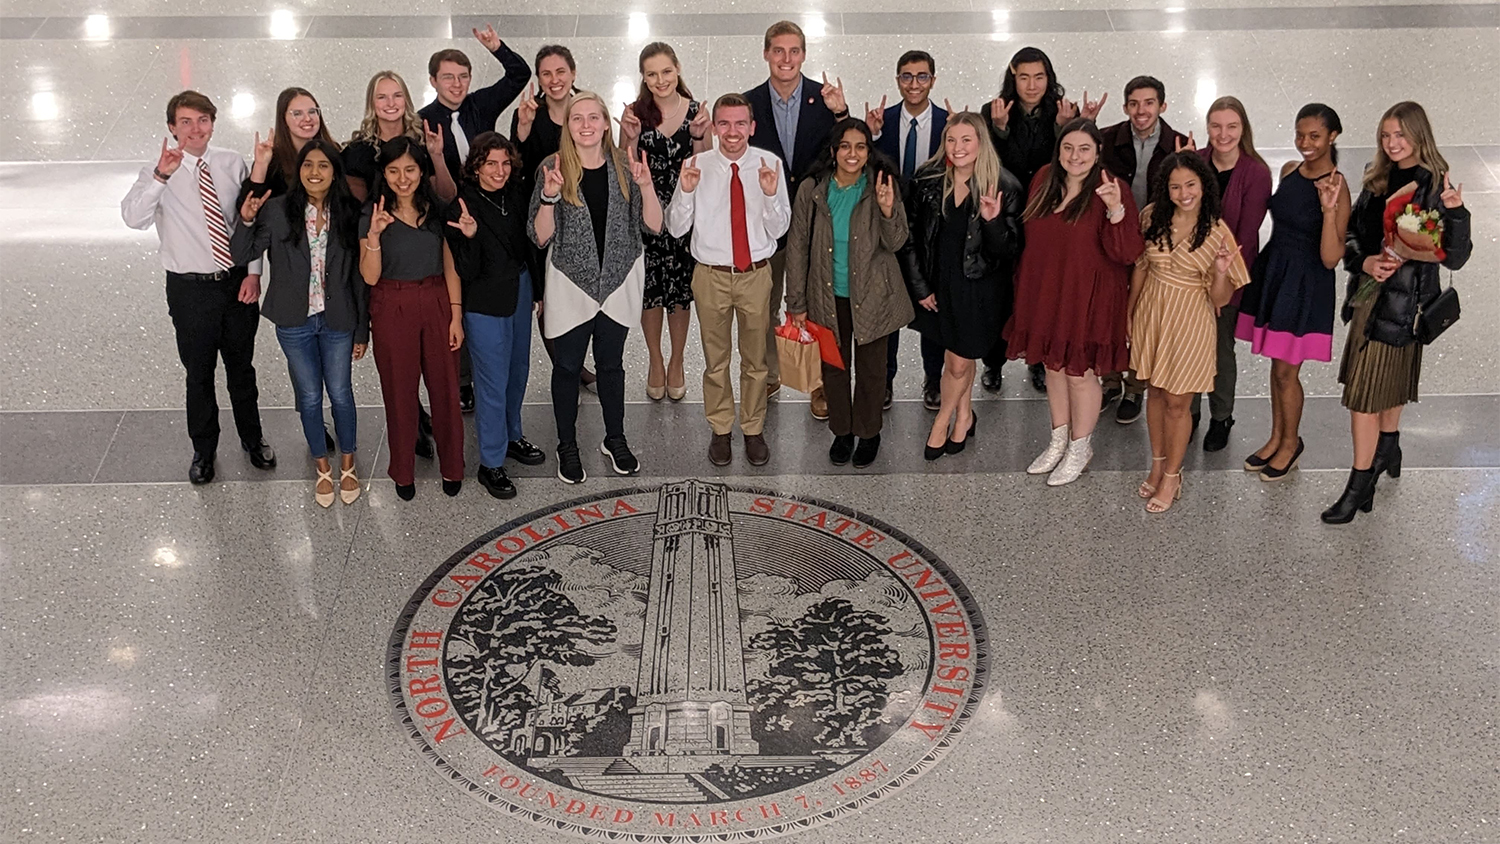 A large group of students stands in front of the NC State seal on the floor of Talley Student Union